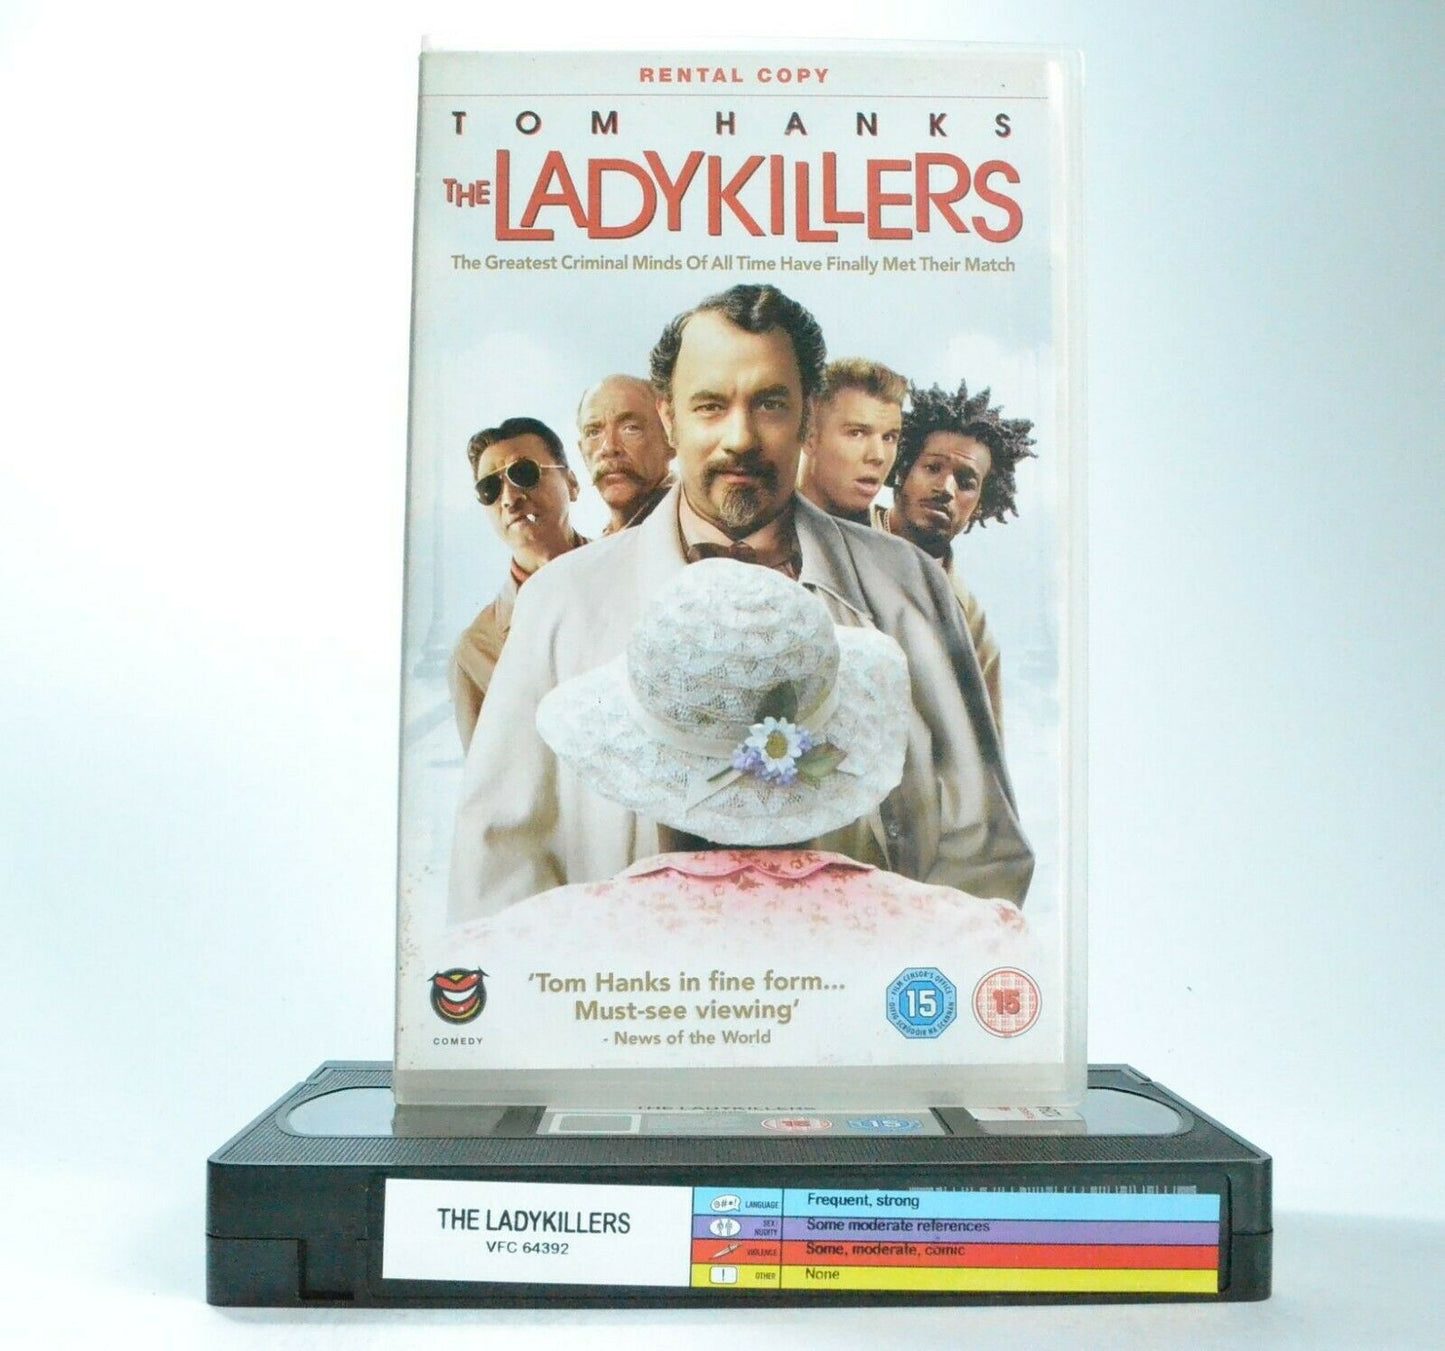 The Ladykillers (2004): An Coen Brothers Film - Black Comedy - Tom Hanks - VHS-